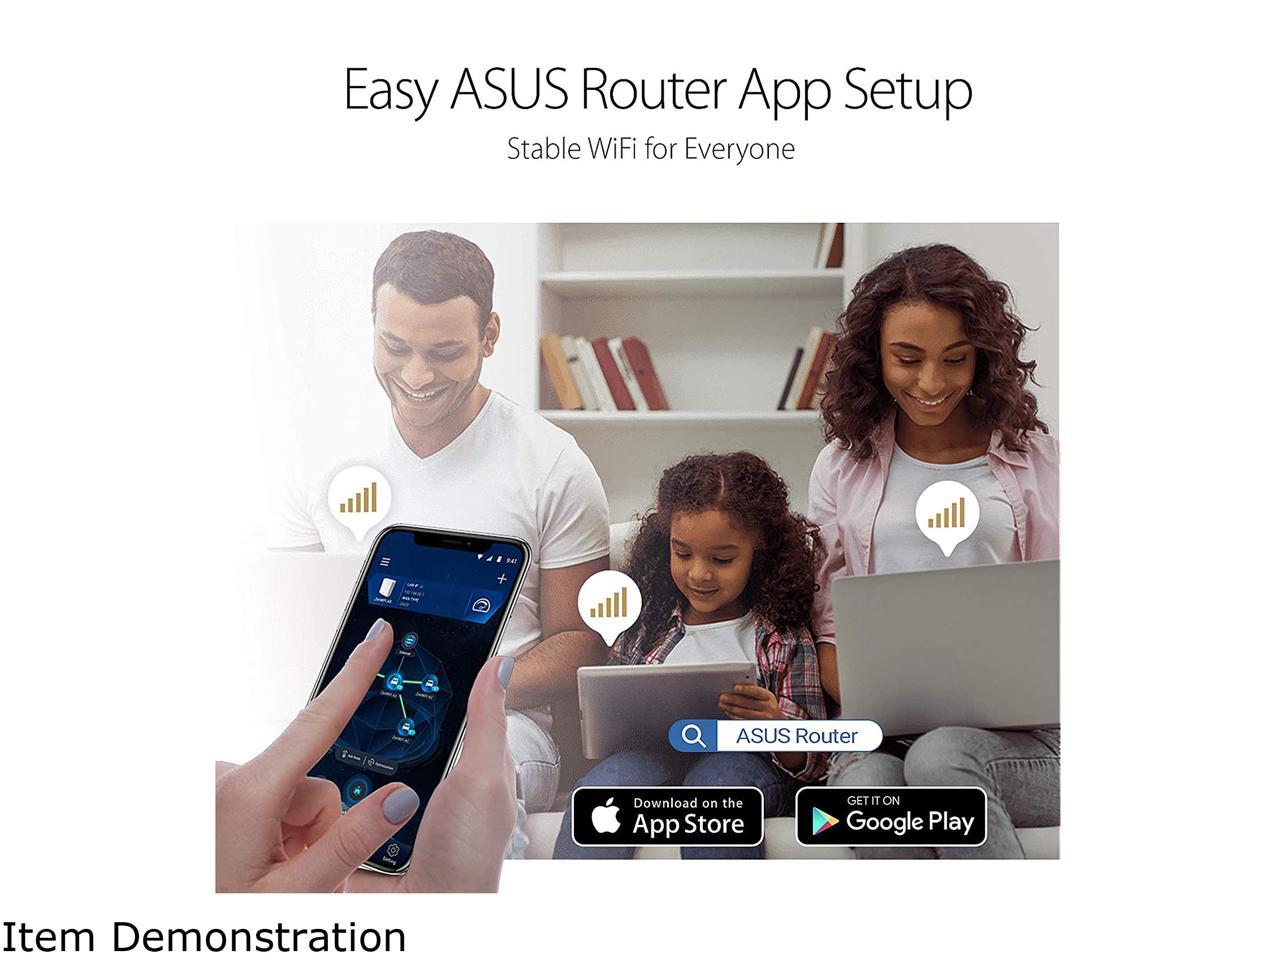 Asus AC1900 Dual Band RT-AC67P Smart Router